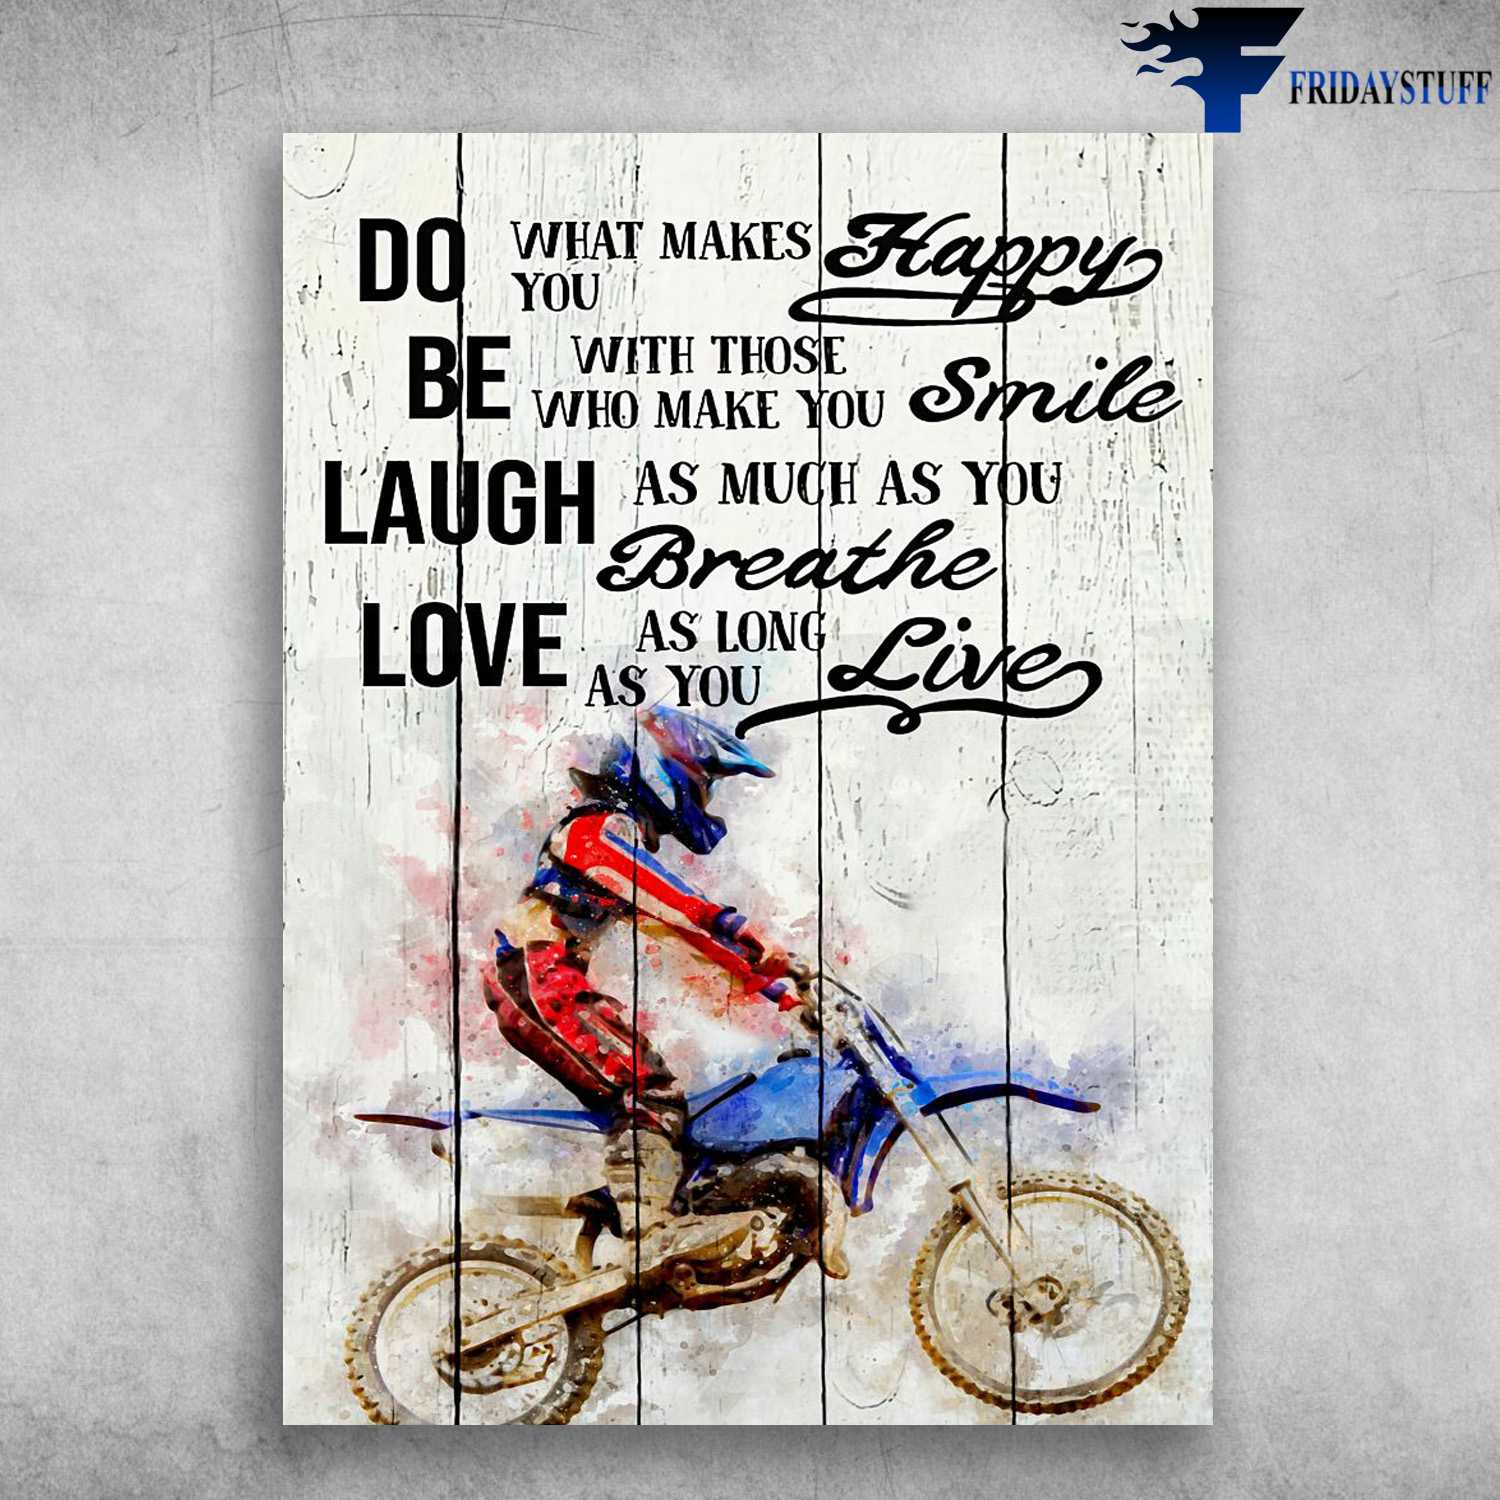 Motocross Man, Dirtbike Lover - Do What Makes You Happy, Be With Those Who Make You Smile, Laugh As Much As You Breathe, Love As Long As You Live